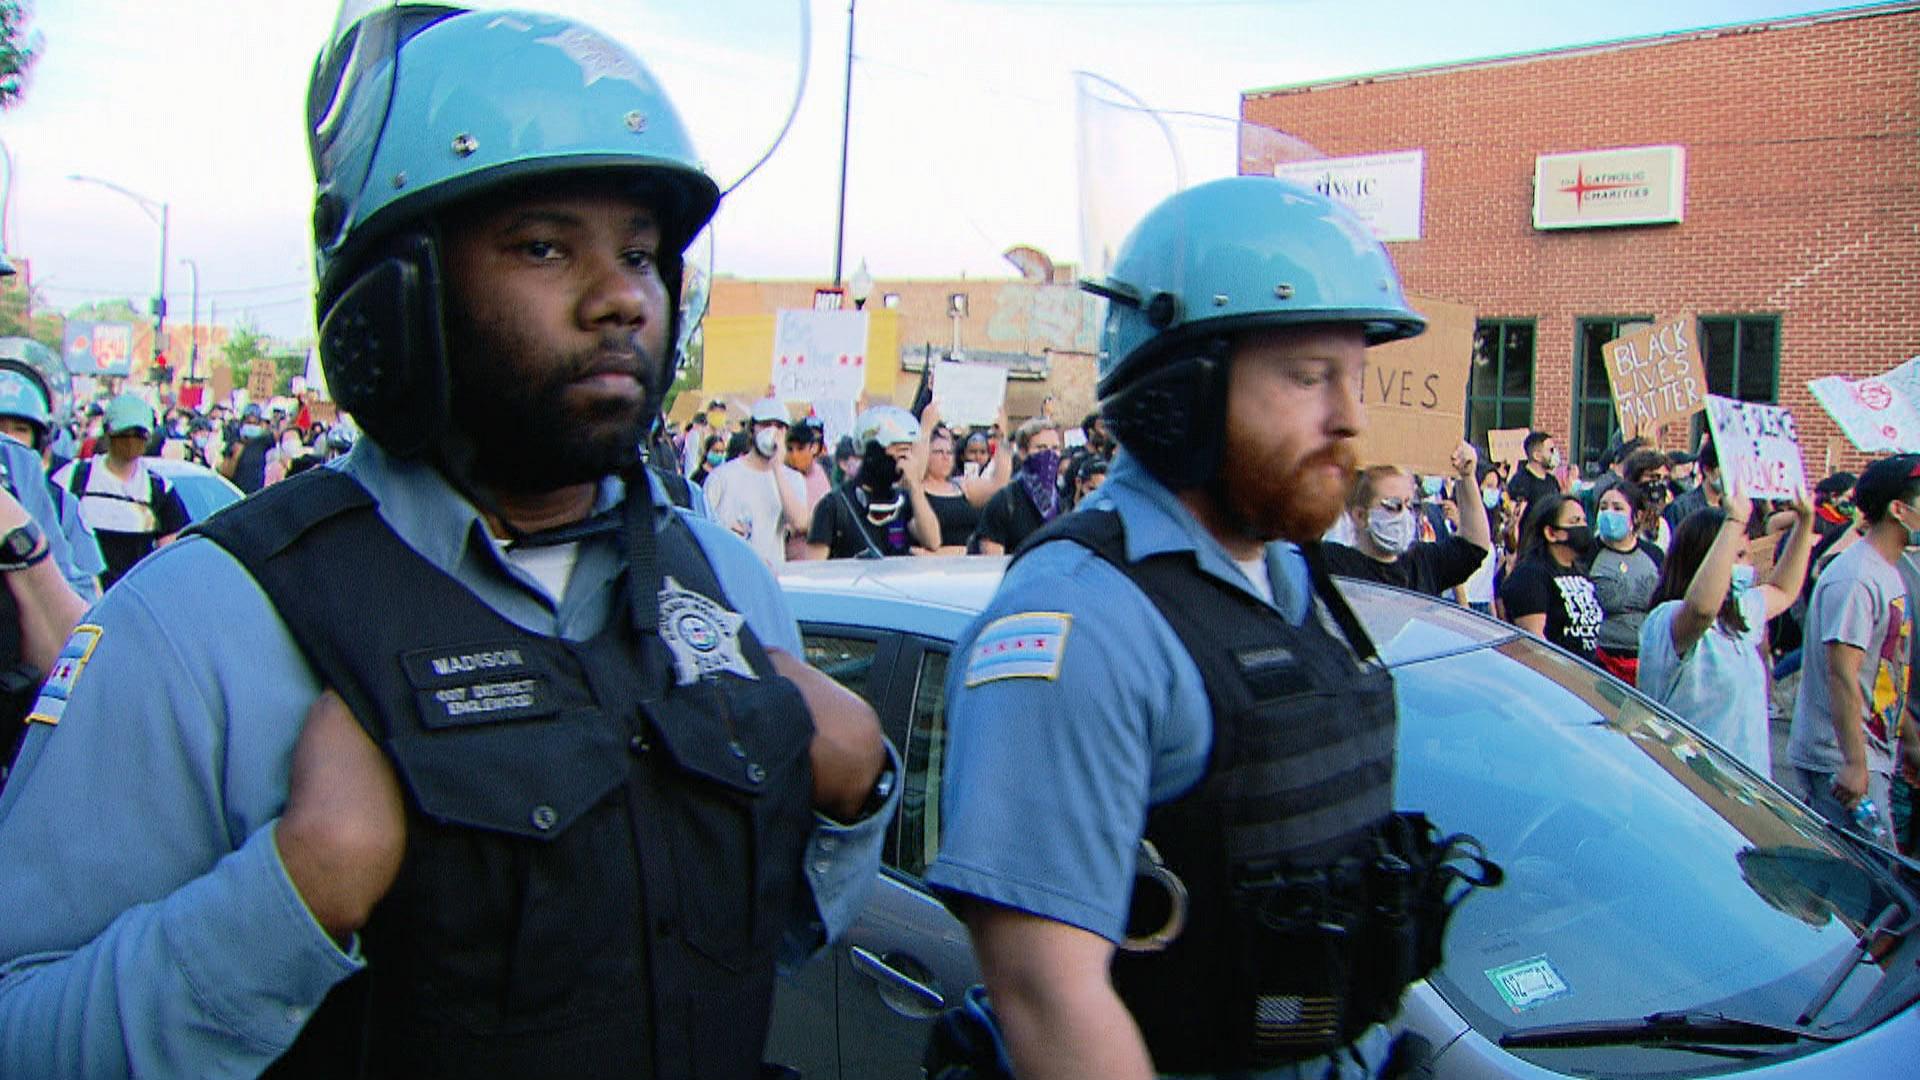 Chicago police officers and demonstrators make their way along city streets during one of many protests sparked by the 2020 police killing of George Floyd. (WTTW News)